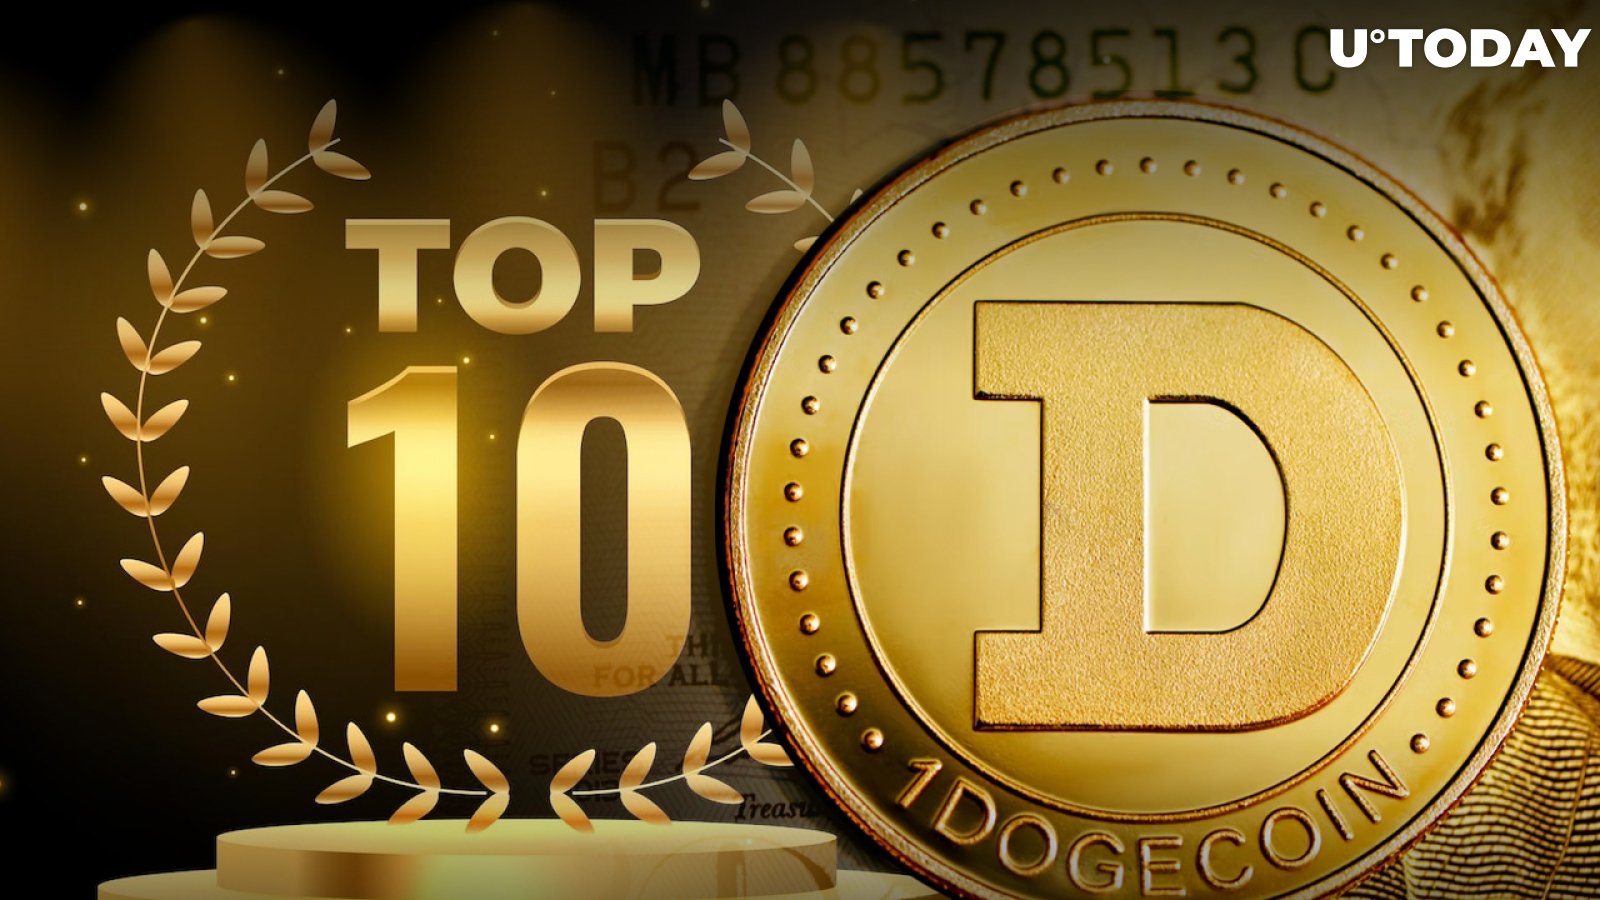 DOGE Makes It to Top 10 List by Trading Volume: Details 